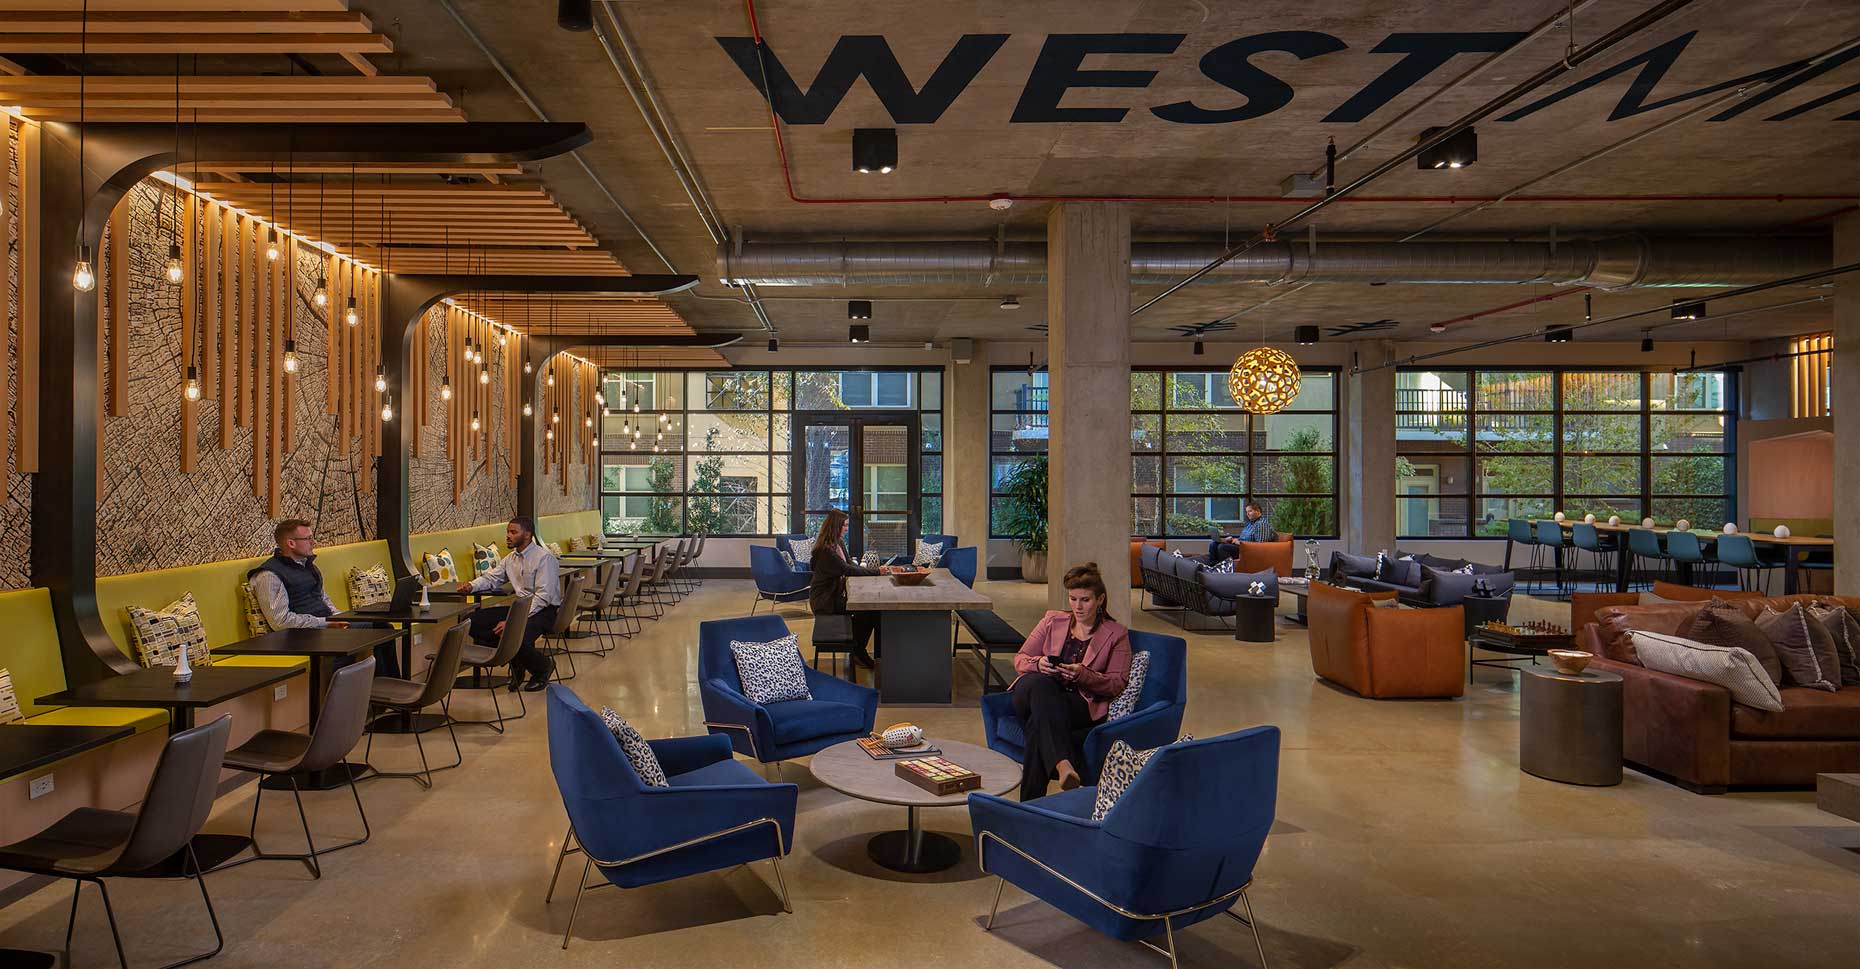 T3 West Midtown - Social Workplace<br>HPA Group / New South Construction / DLR Group / Hines